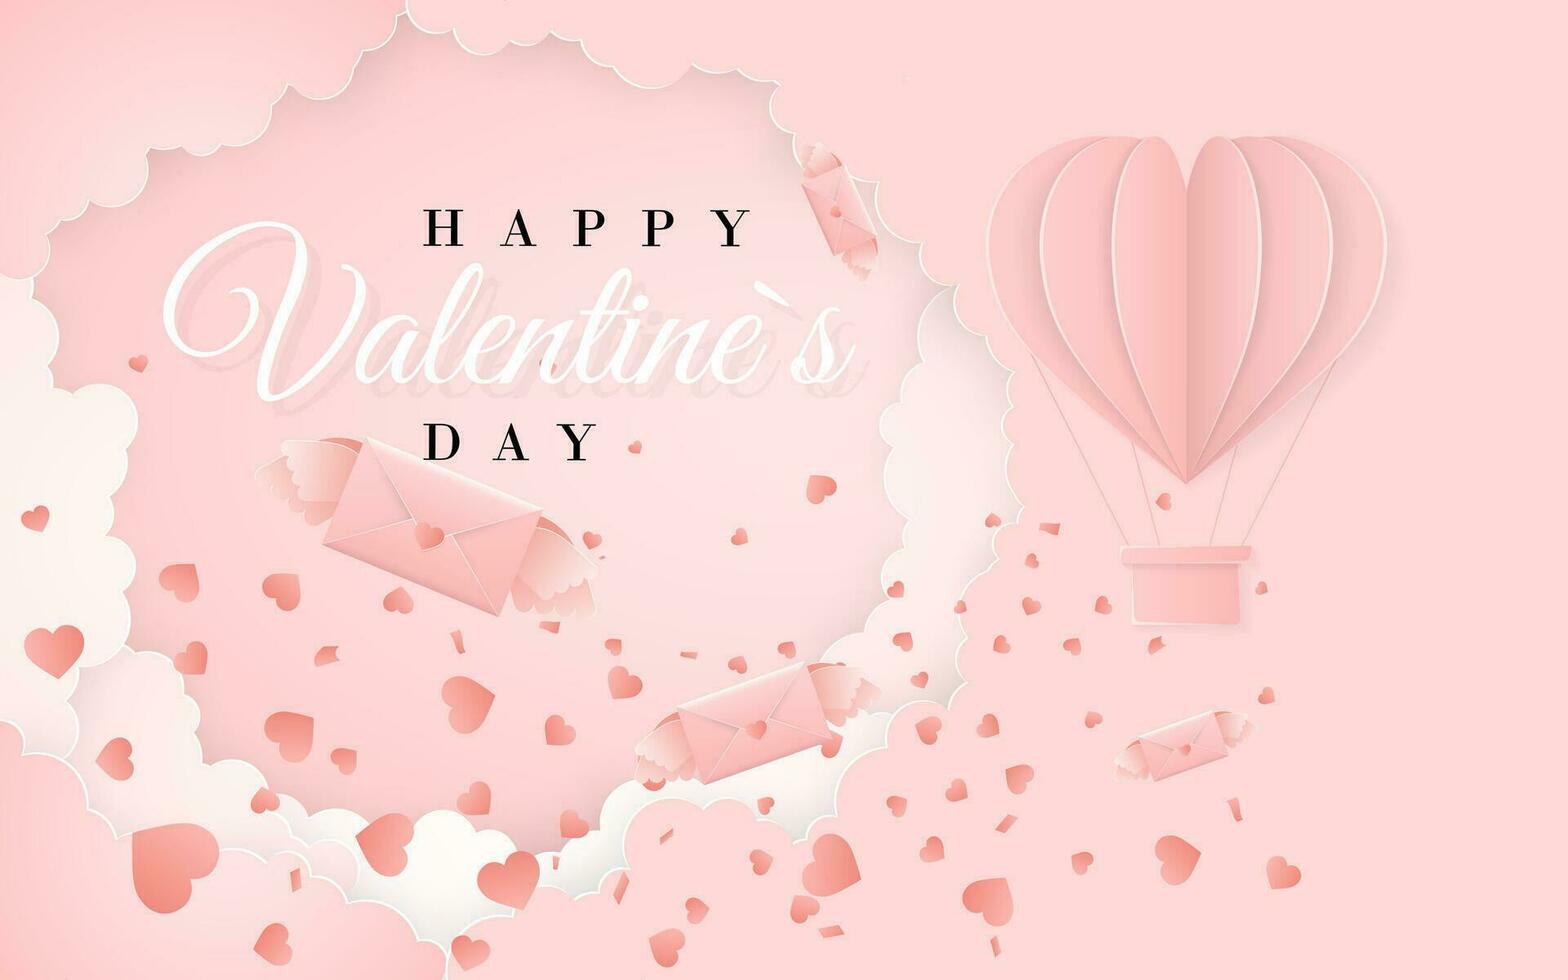 Happy valentines day invitation card template with origami paper hot air balloon in heart shape, paper letter, white clouds and confetti. Pink background. Vector illustration